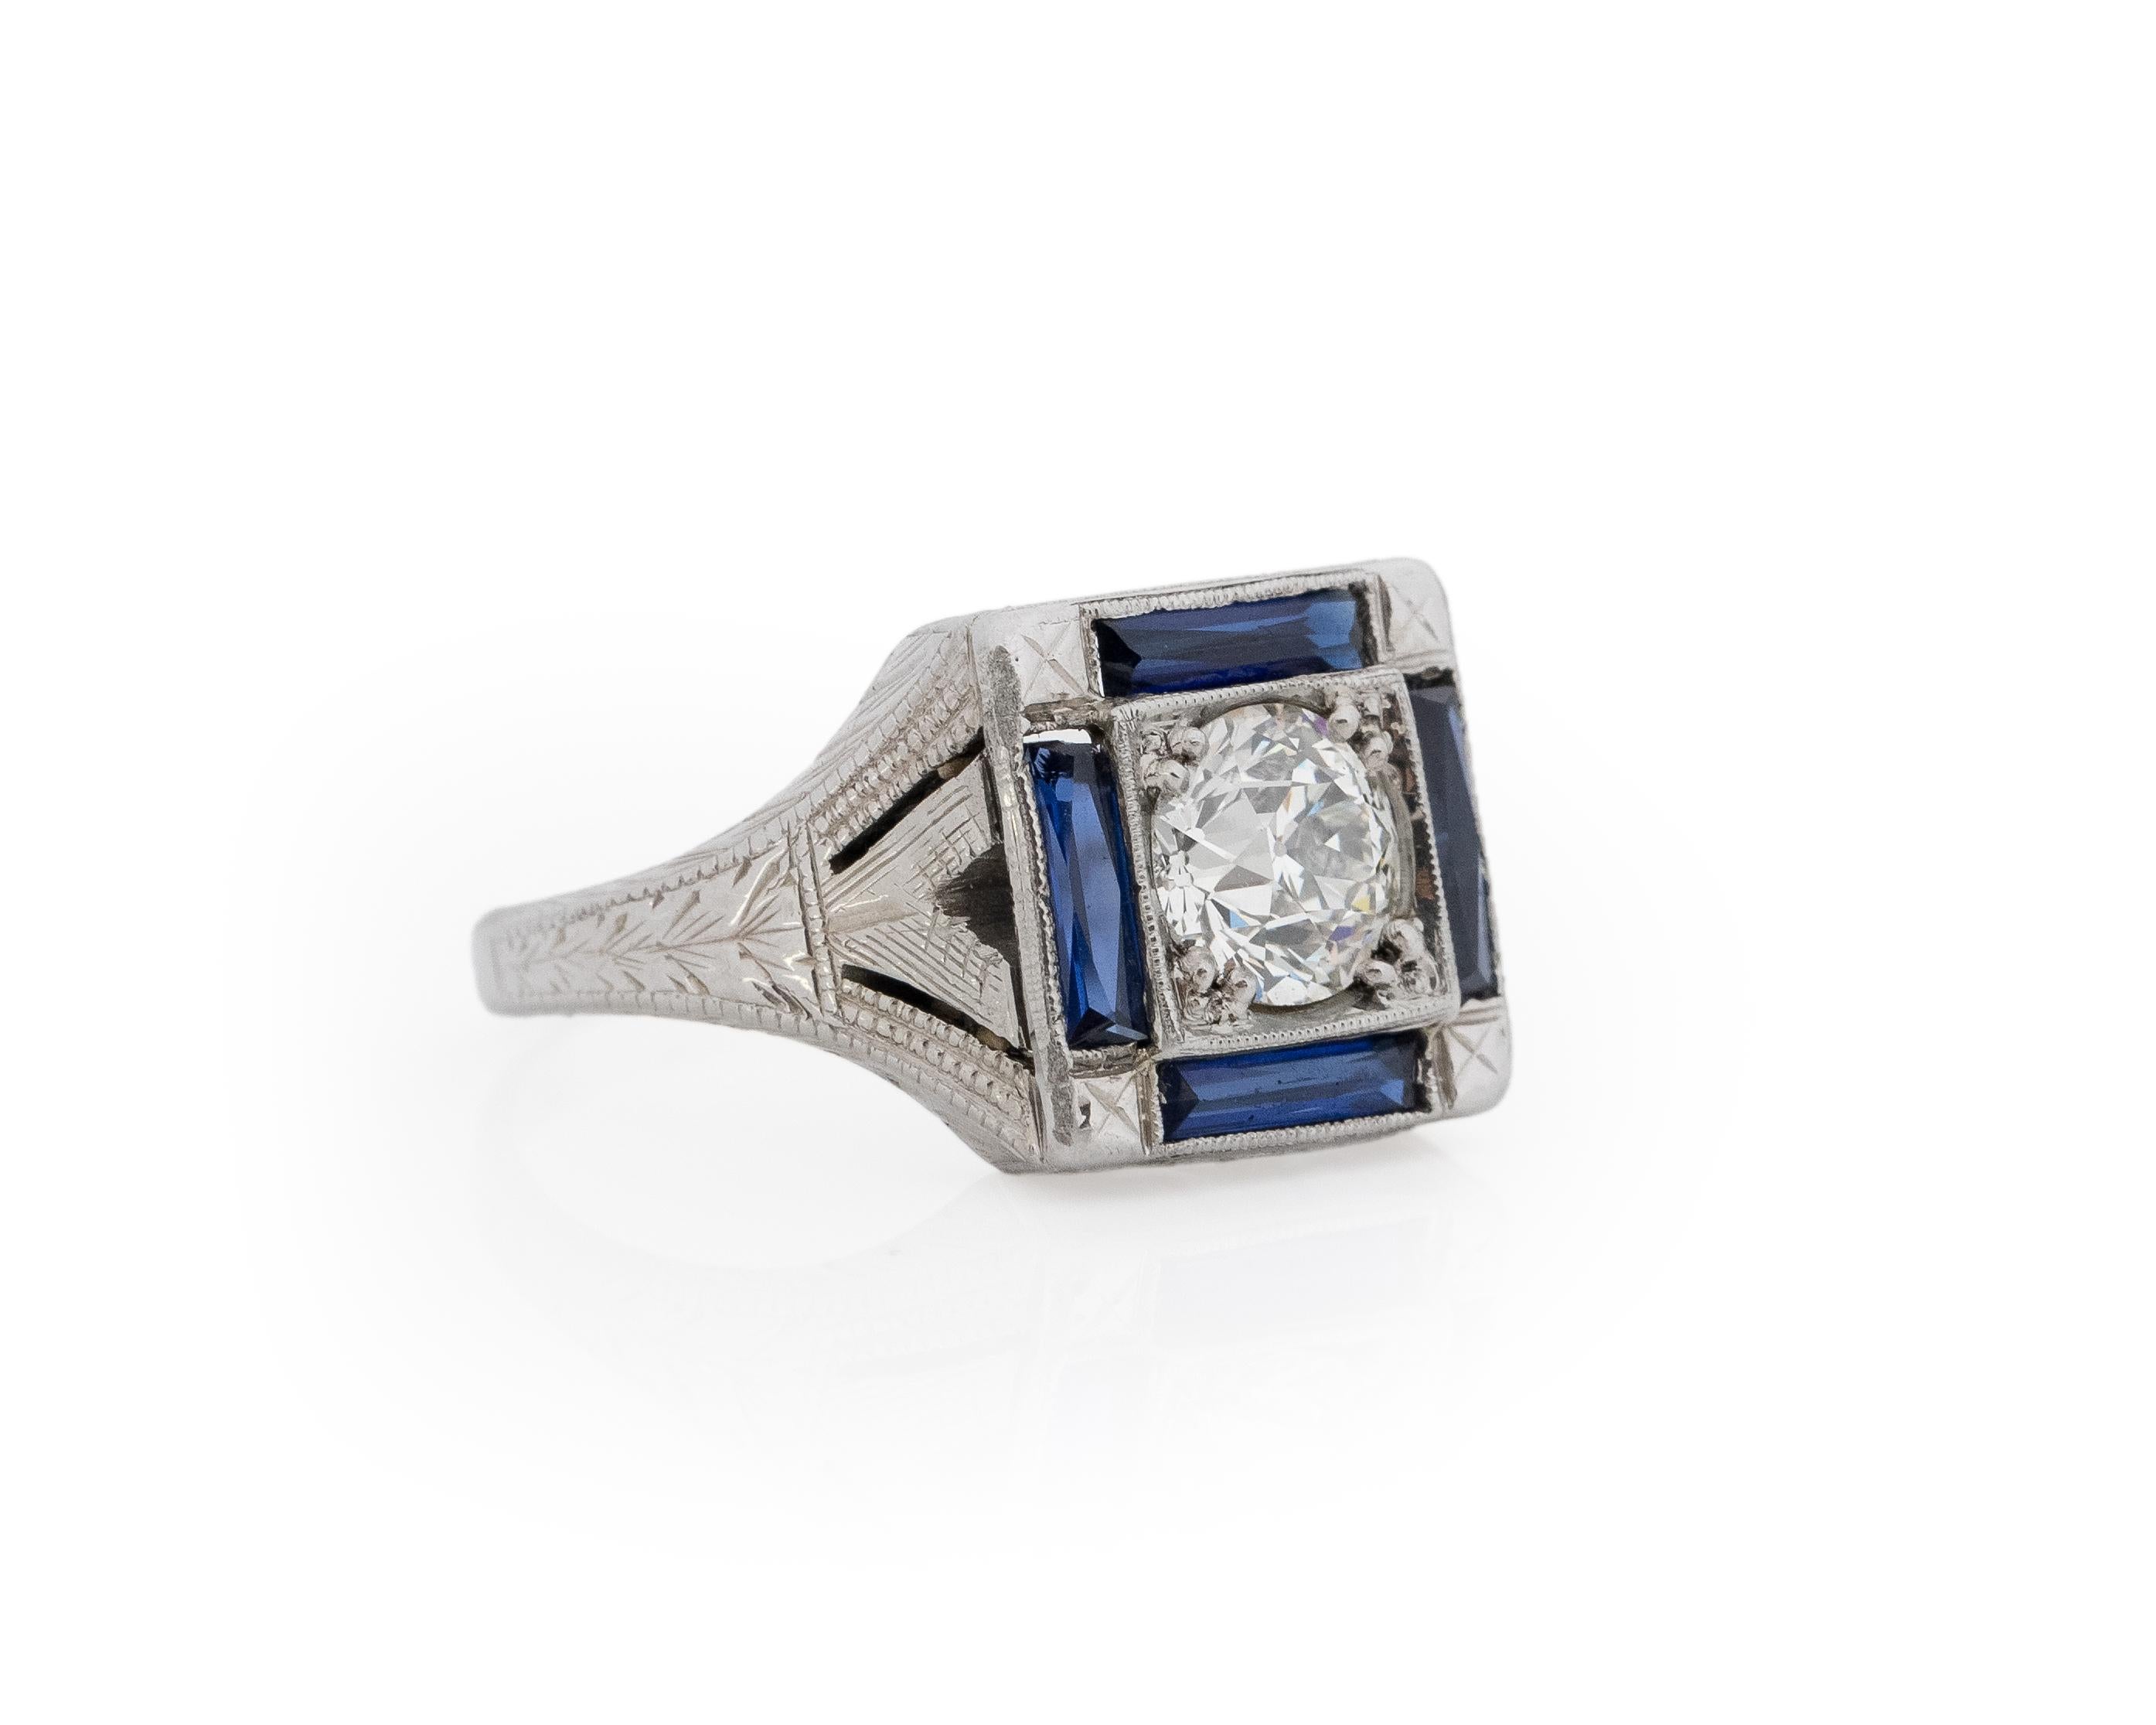 Year: 1930s

Item Details:
Ring Size: 7
Metal Type: 18k White Gold [Hallmarked, and Tested]
Weight: 4.8 grams

Center Diamond Details:

GIA Report#: 5231081738
Weight: .88ct total weight
Cut: Old European brilliant
Color: J
Clarity: VS2
Type: